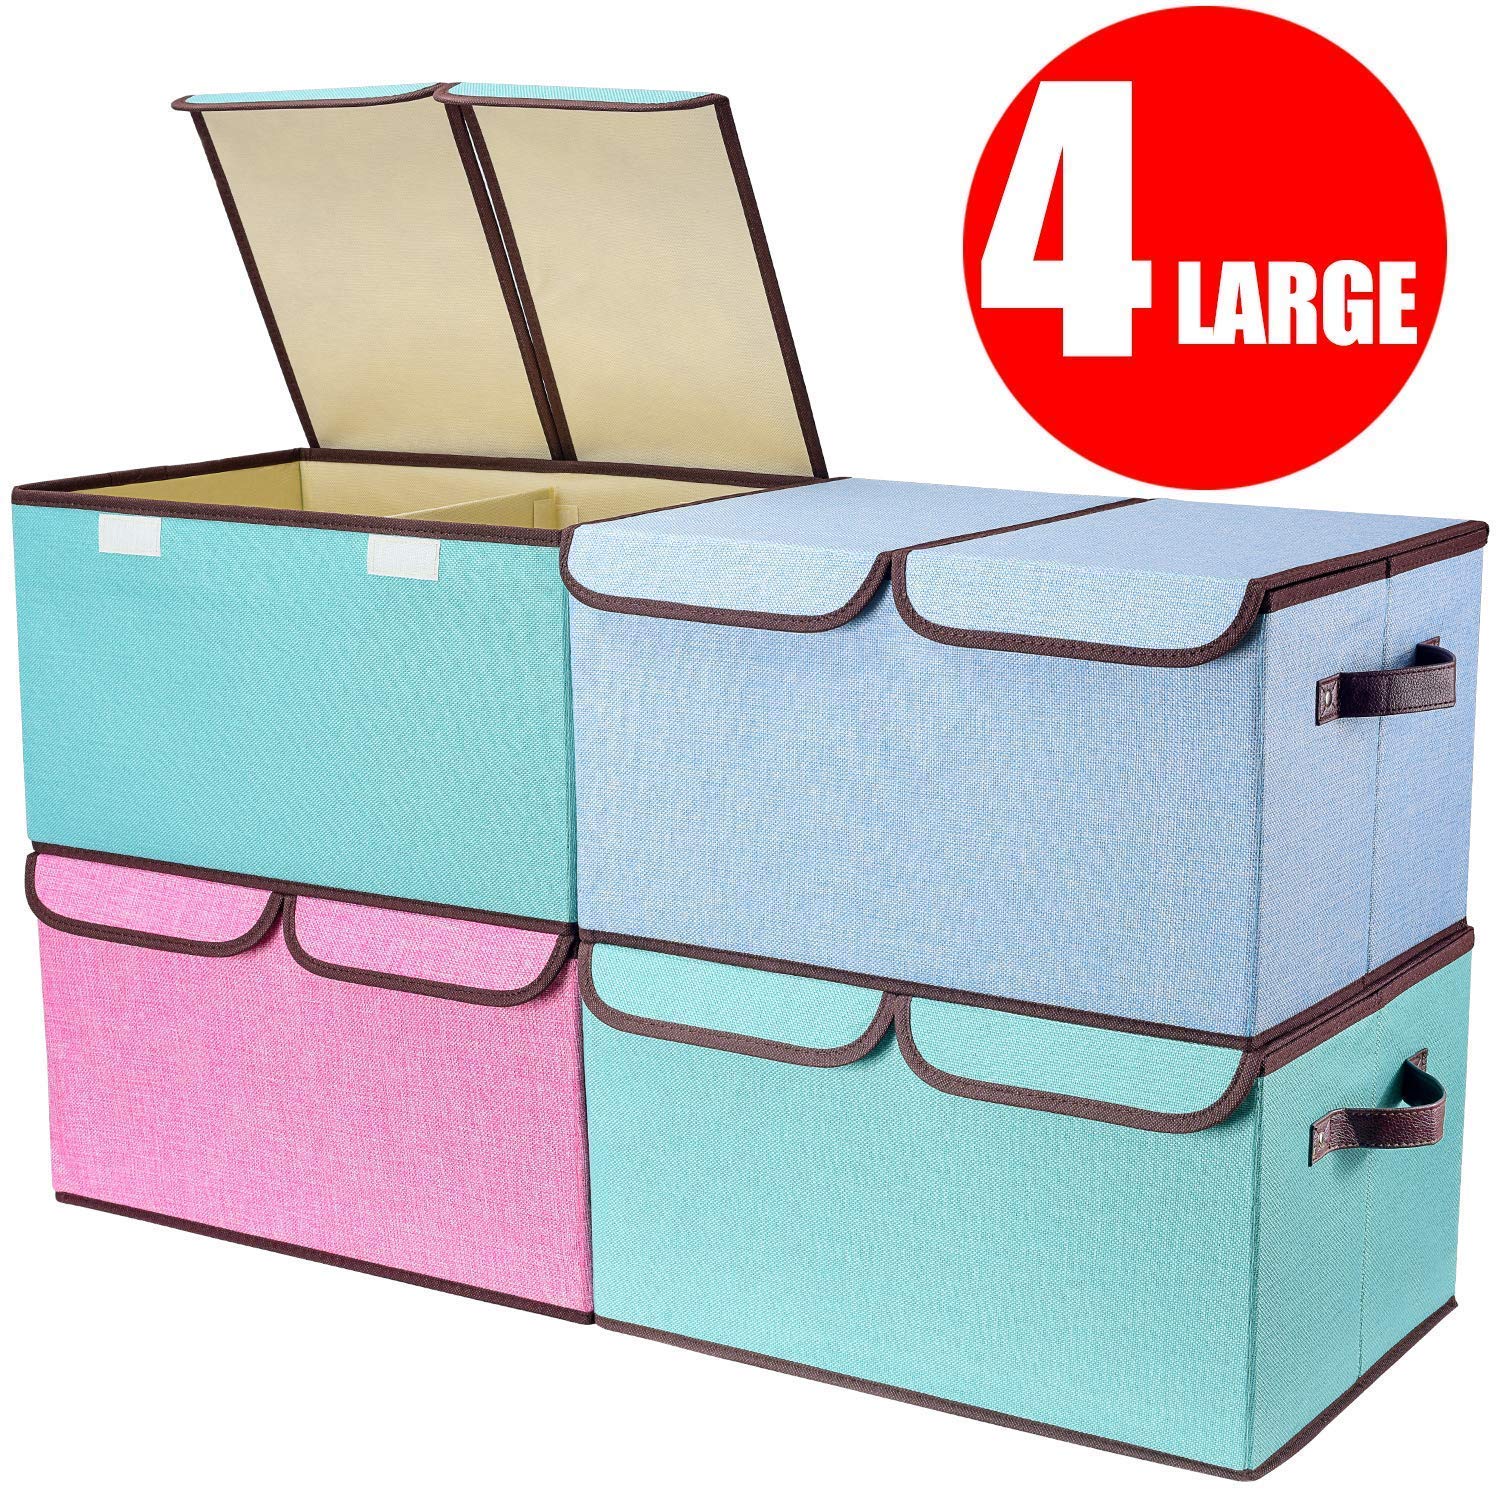 senbowe Larger Storage Cubes [4-Pack] Linen Fabric Foldable Collapsible Storage Cube Bin Organizer Basket with Lid, Handles, Removable Divider for Home, Office, Nursery, Closet - (17.7 x 11.8 x 9.8”)